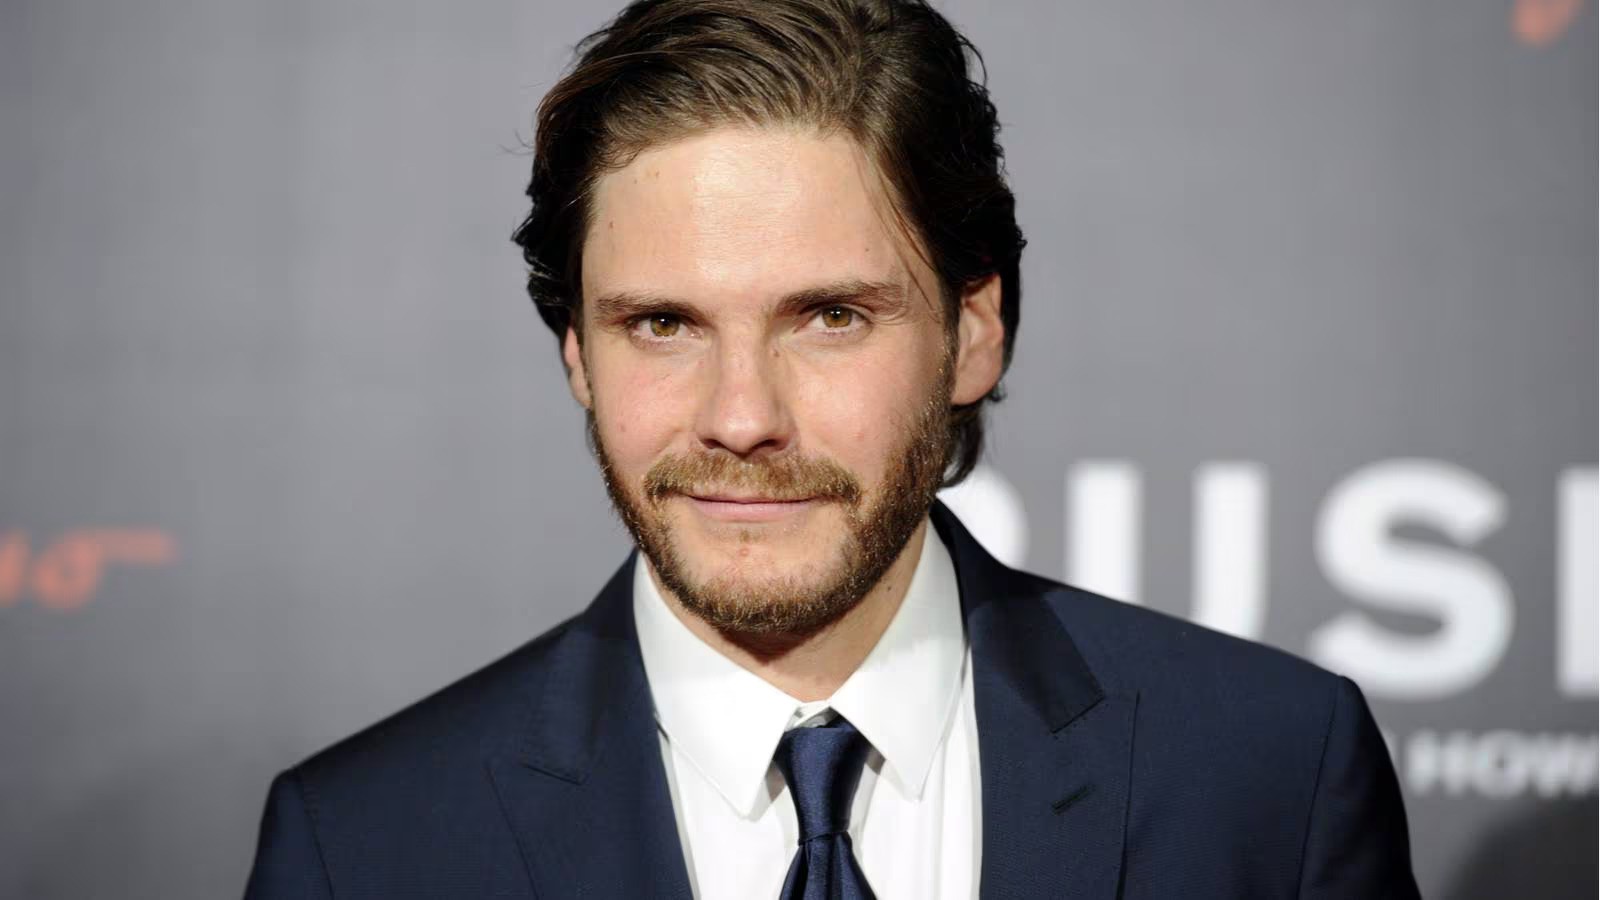 Daniel Brühl wearing a black suit and tie on a white shirt at an event